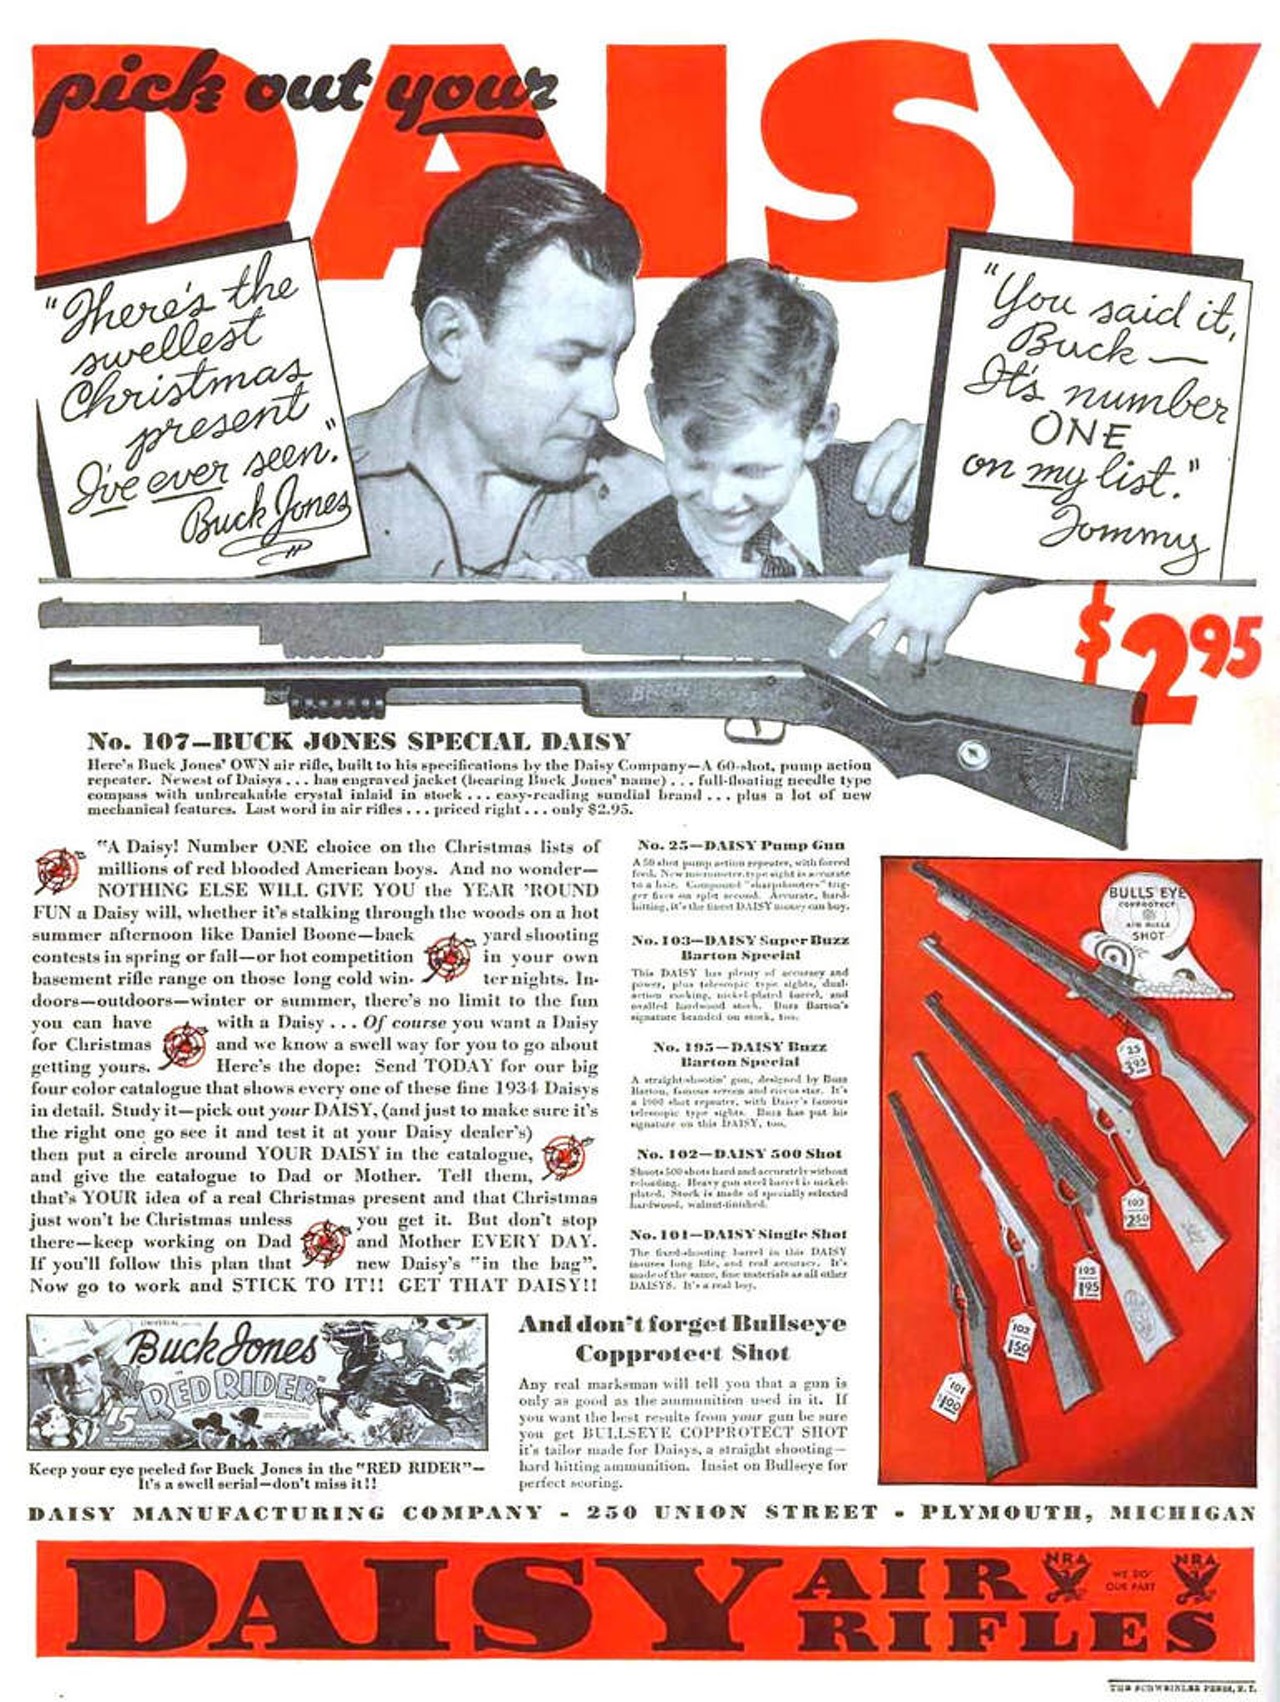 Buck Jones for Special Daisy Rifle Christmas ad, 1934 (Photo via The Bees Knees Daily, Flickr Creative Commons)